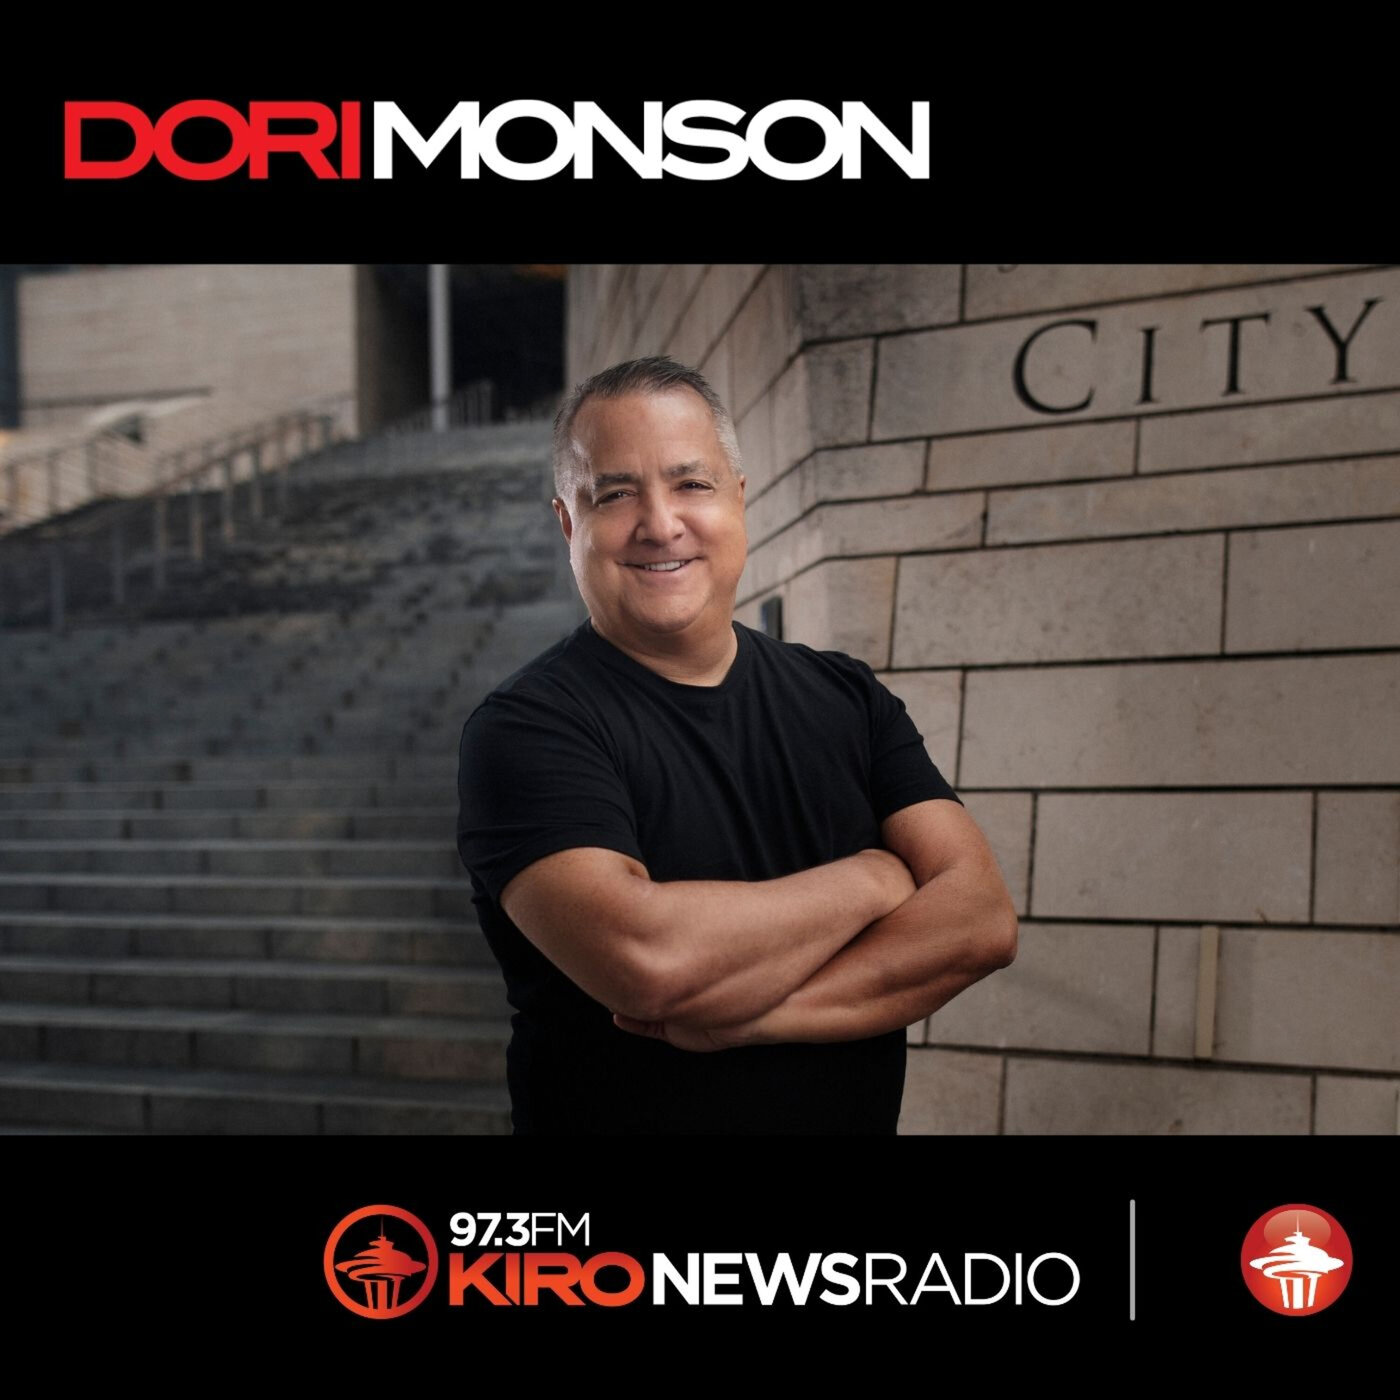 The Very Best of the Dori Monson Show, Day 1: Hour 1